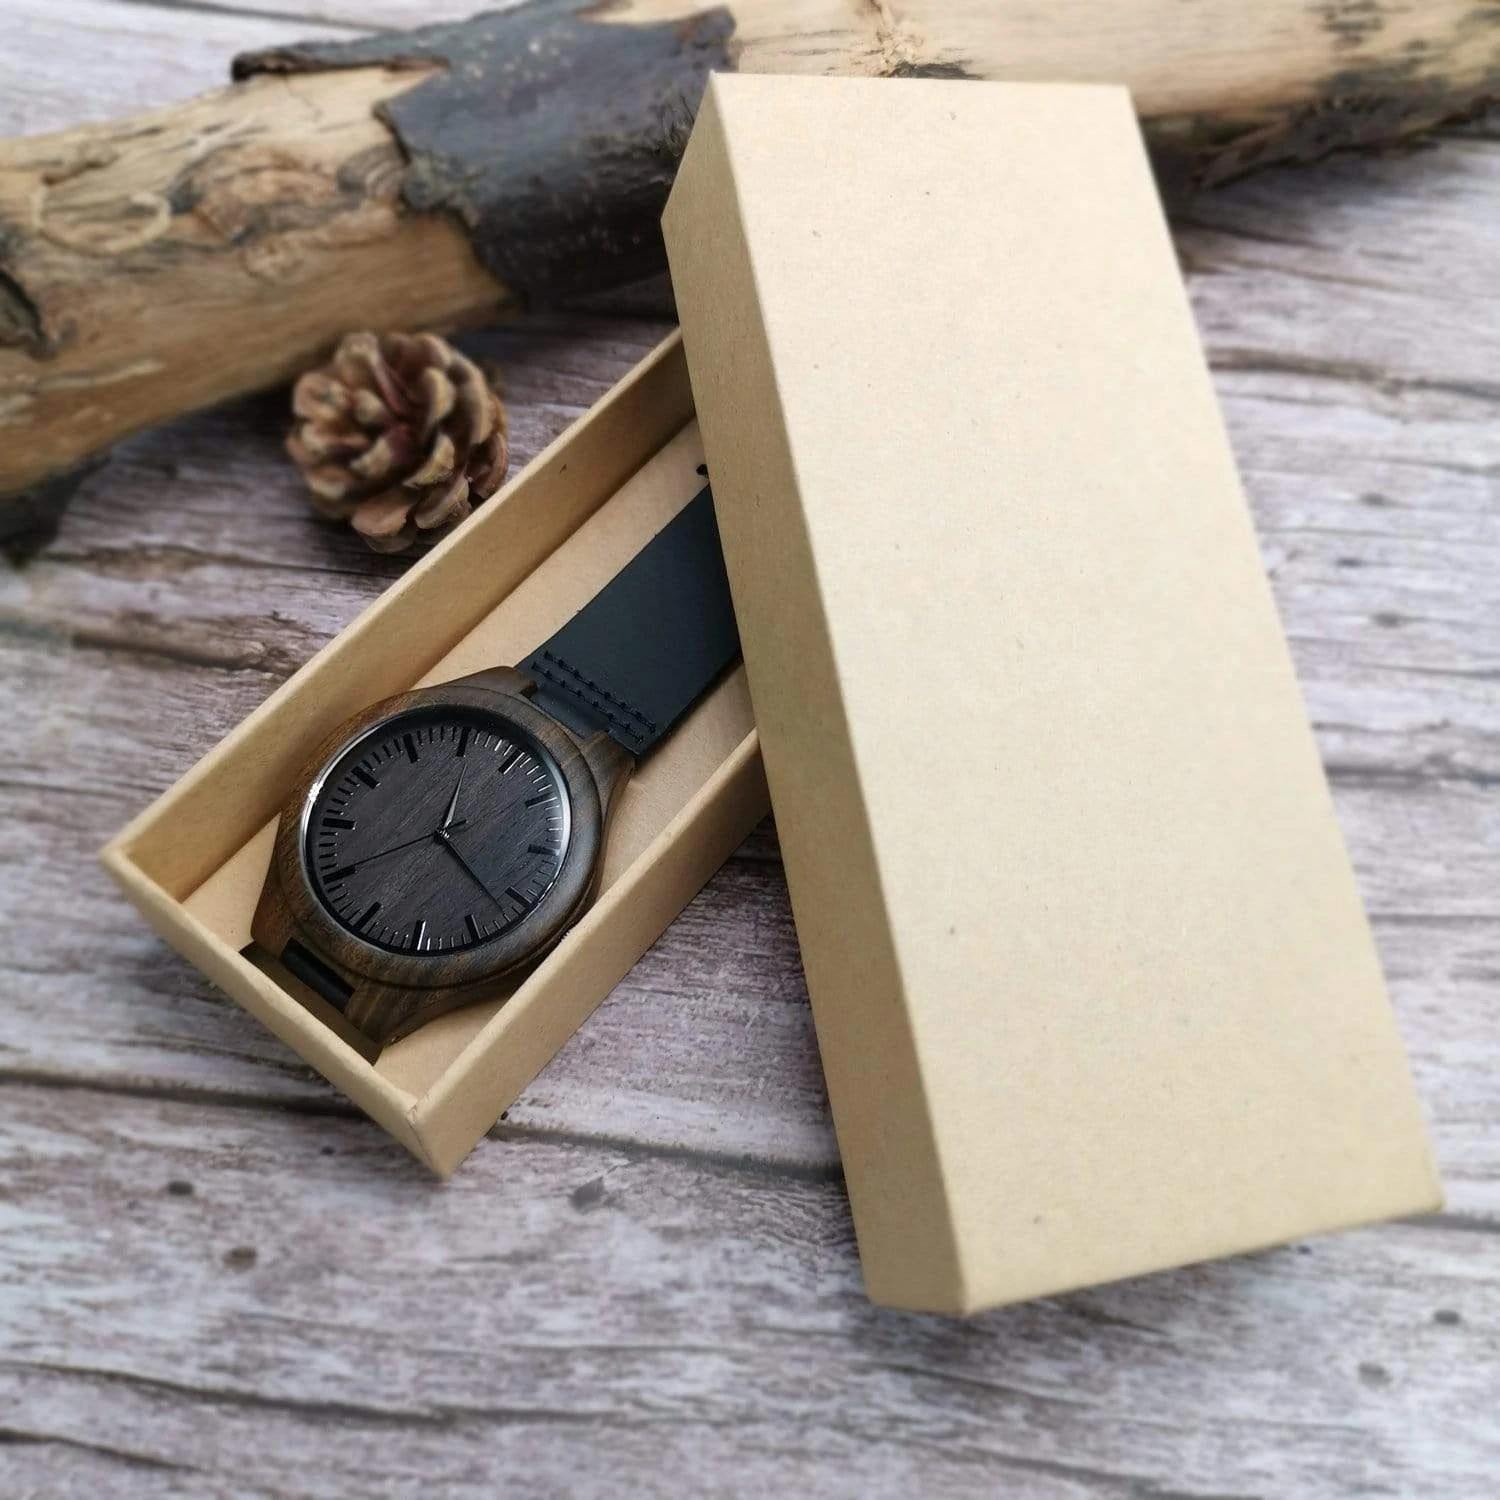 Gift For Son From Dad Never Forget That I Love You Engraved Wooden Watch